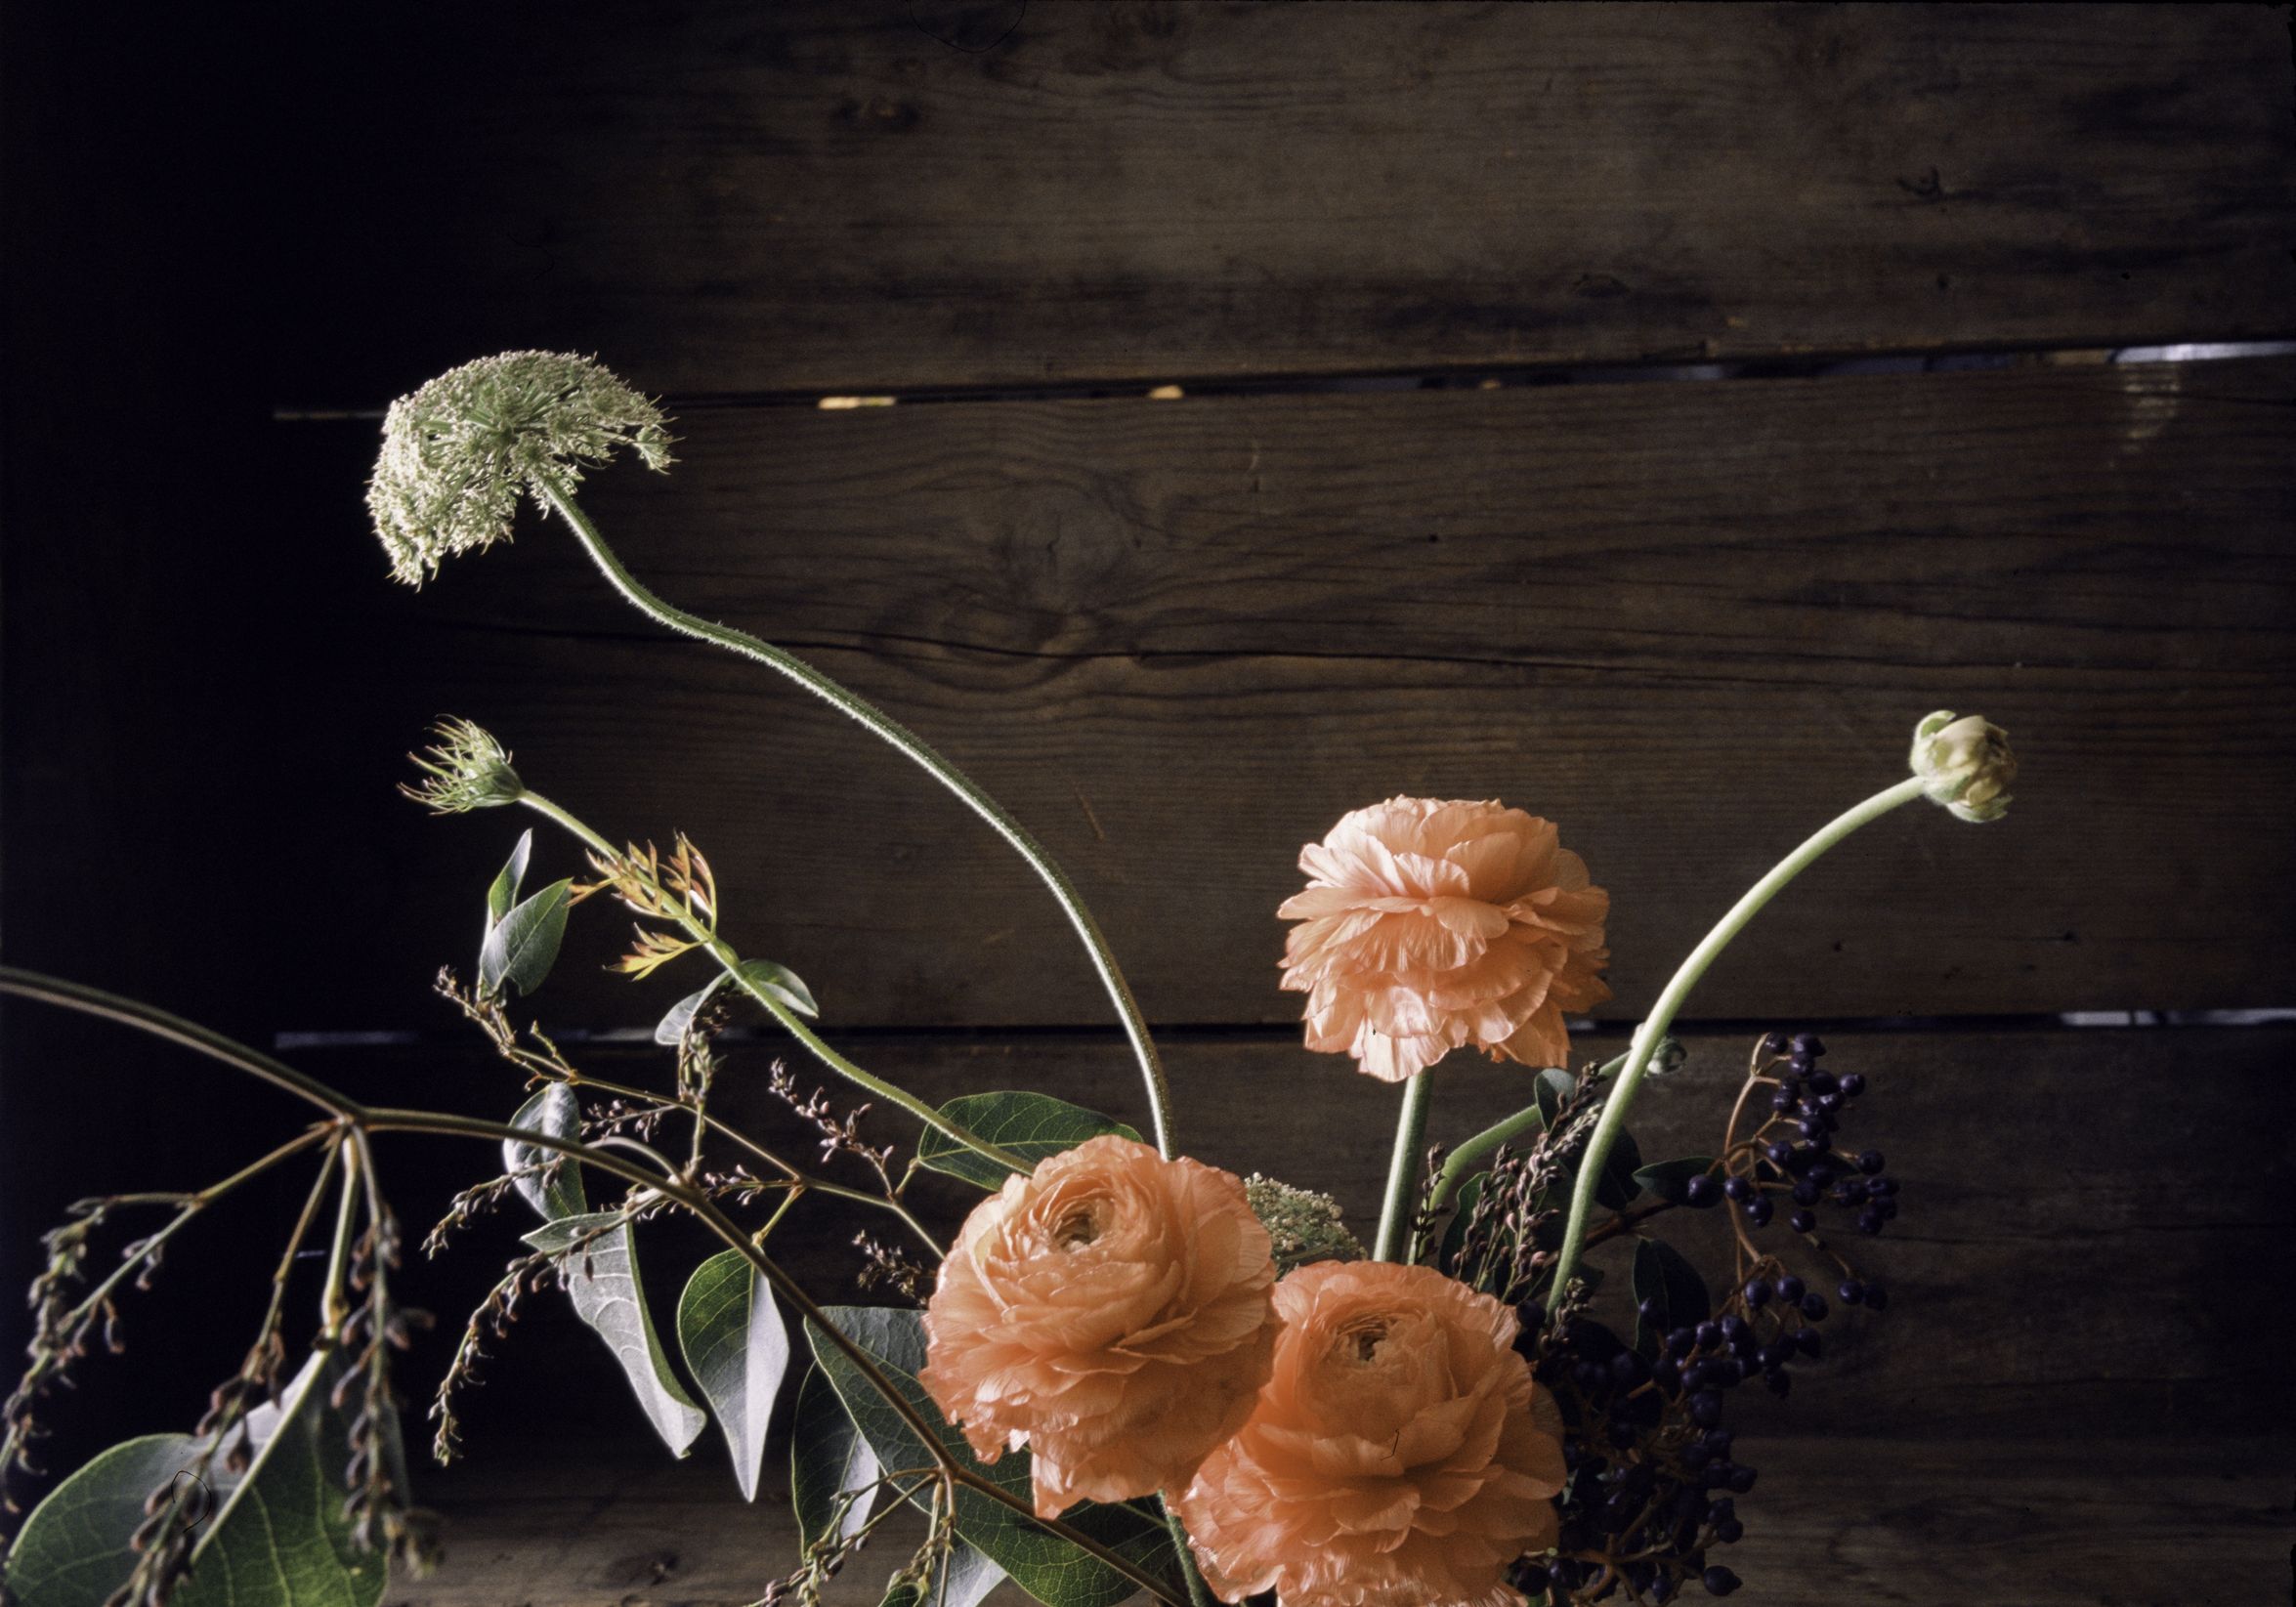 The 10 Best Florists Near Me (with Free Estimates)